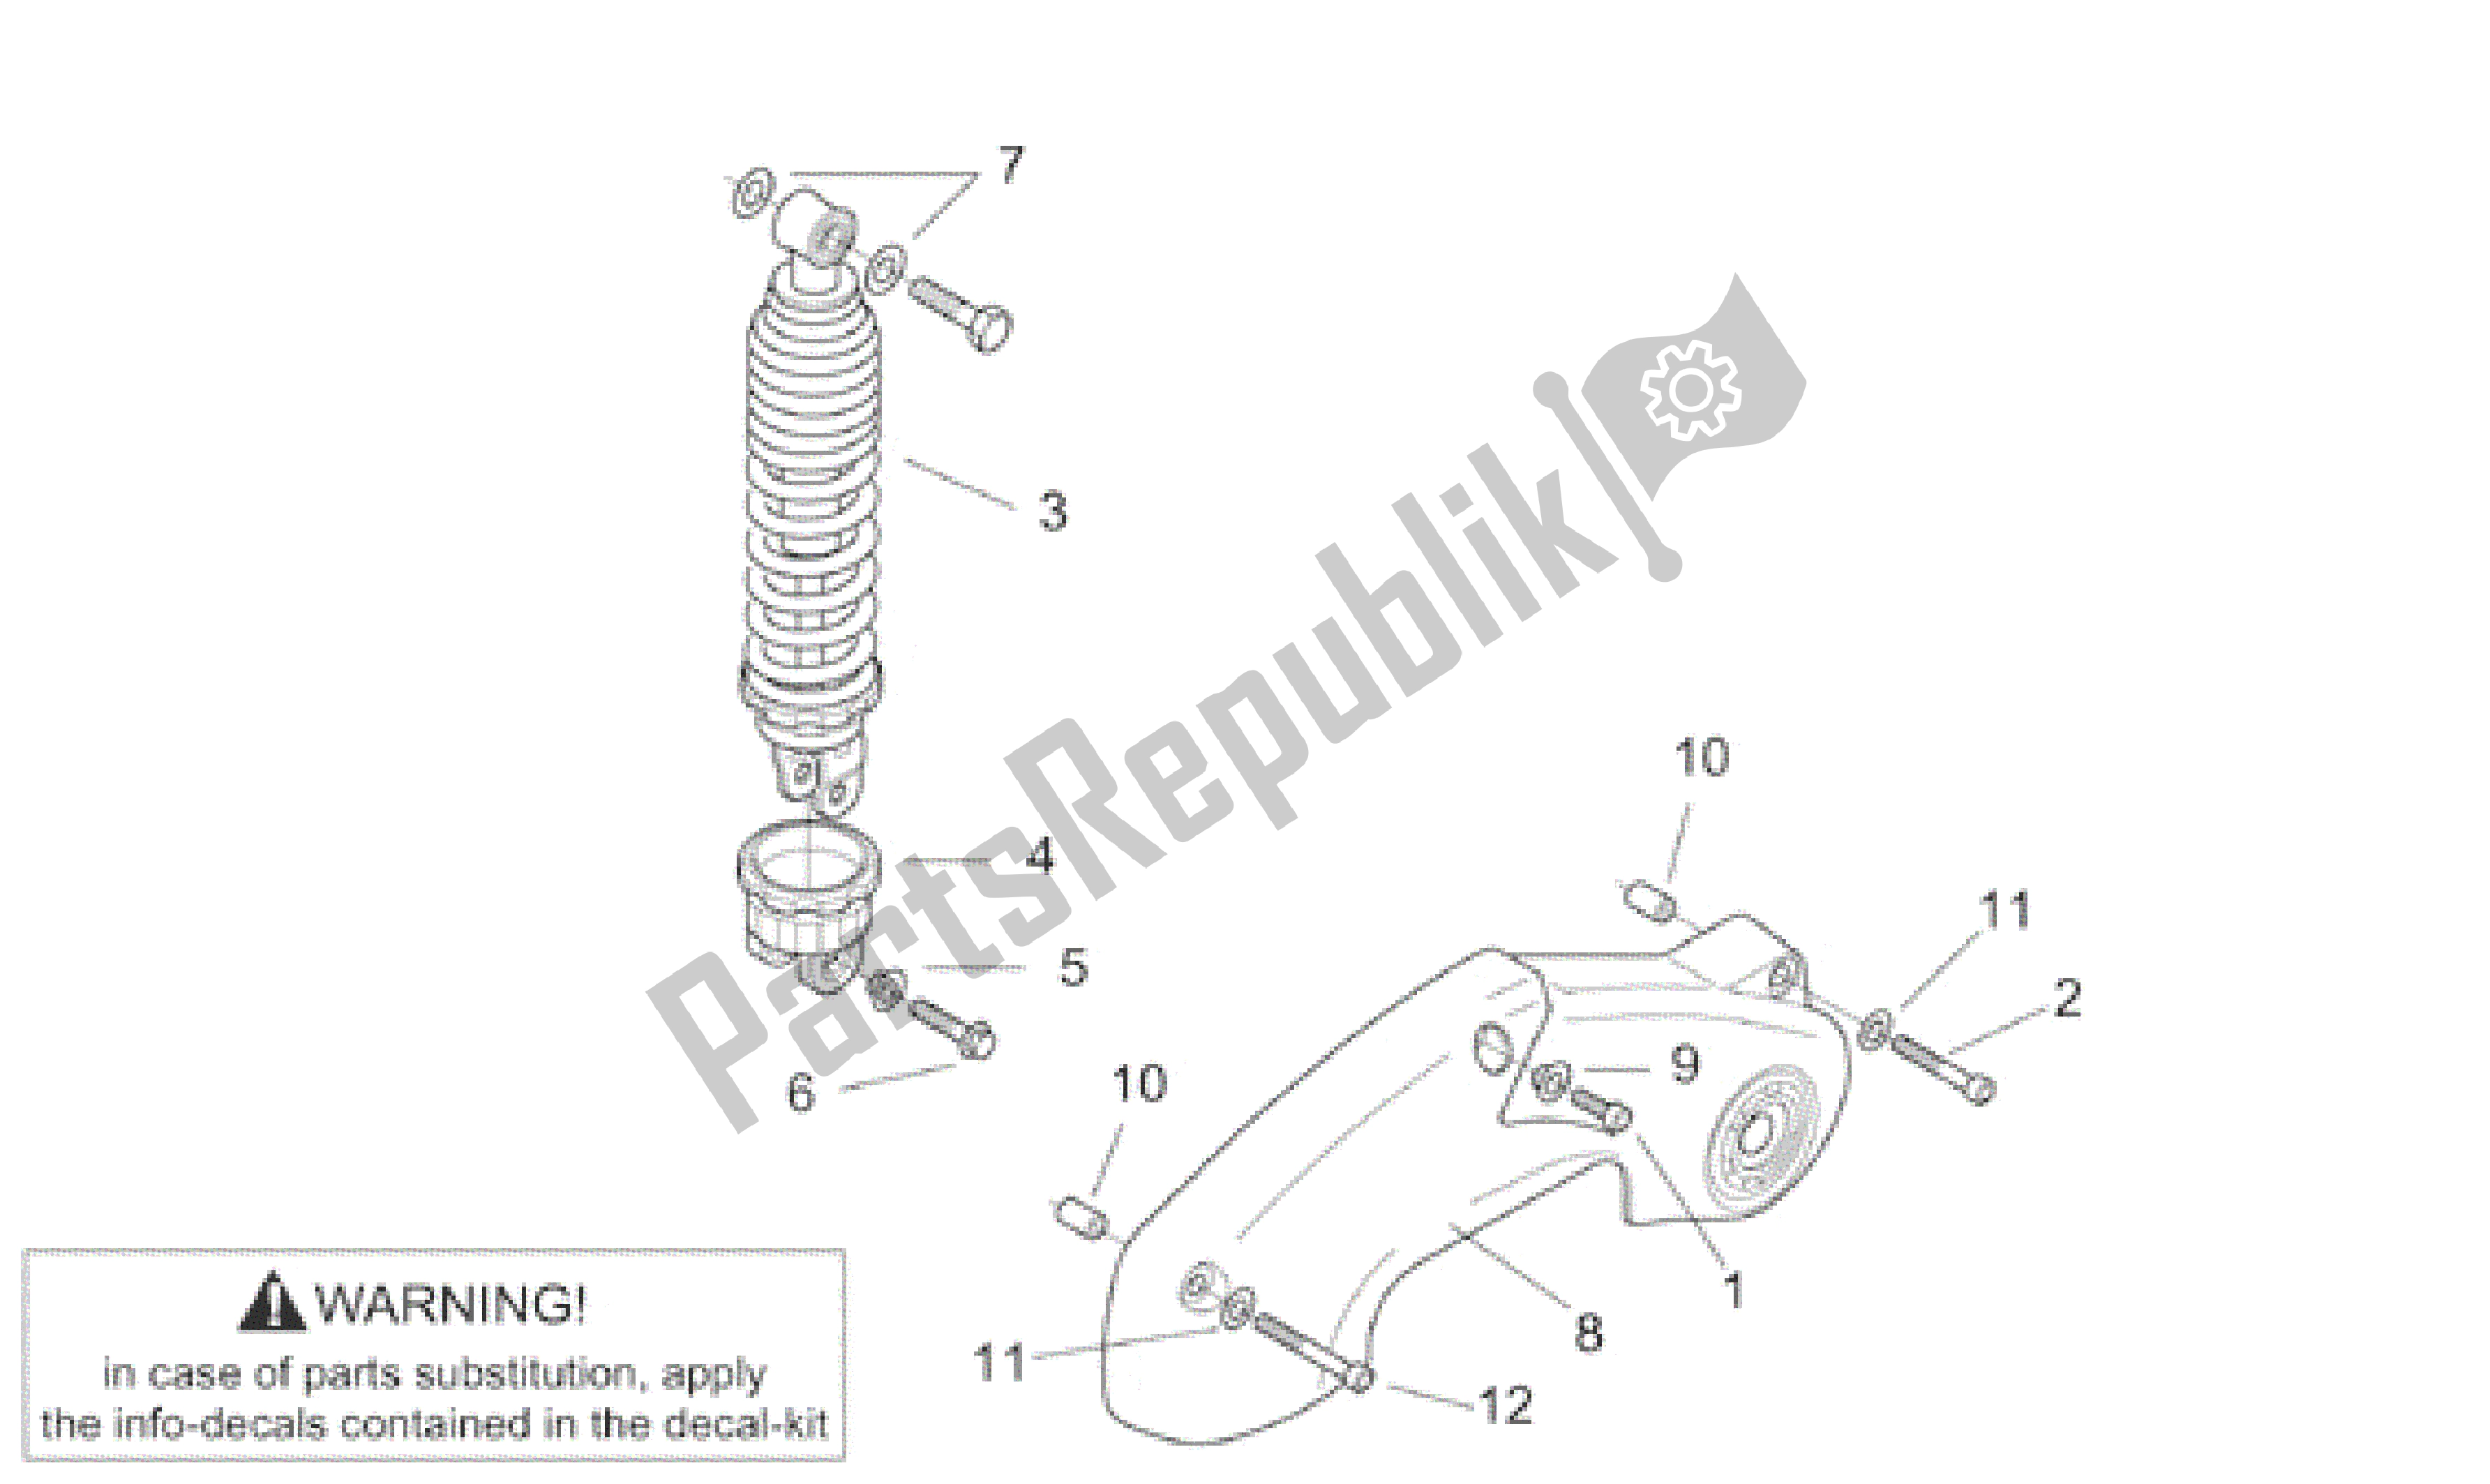 All parts for the Shock Absorber of the Aprilia SR WWW 50 1997 - 1999